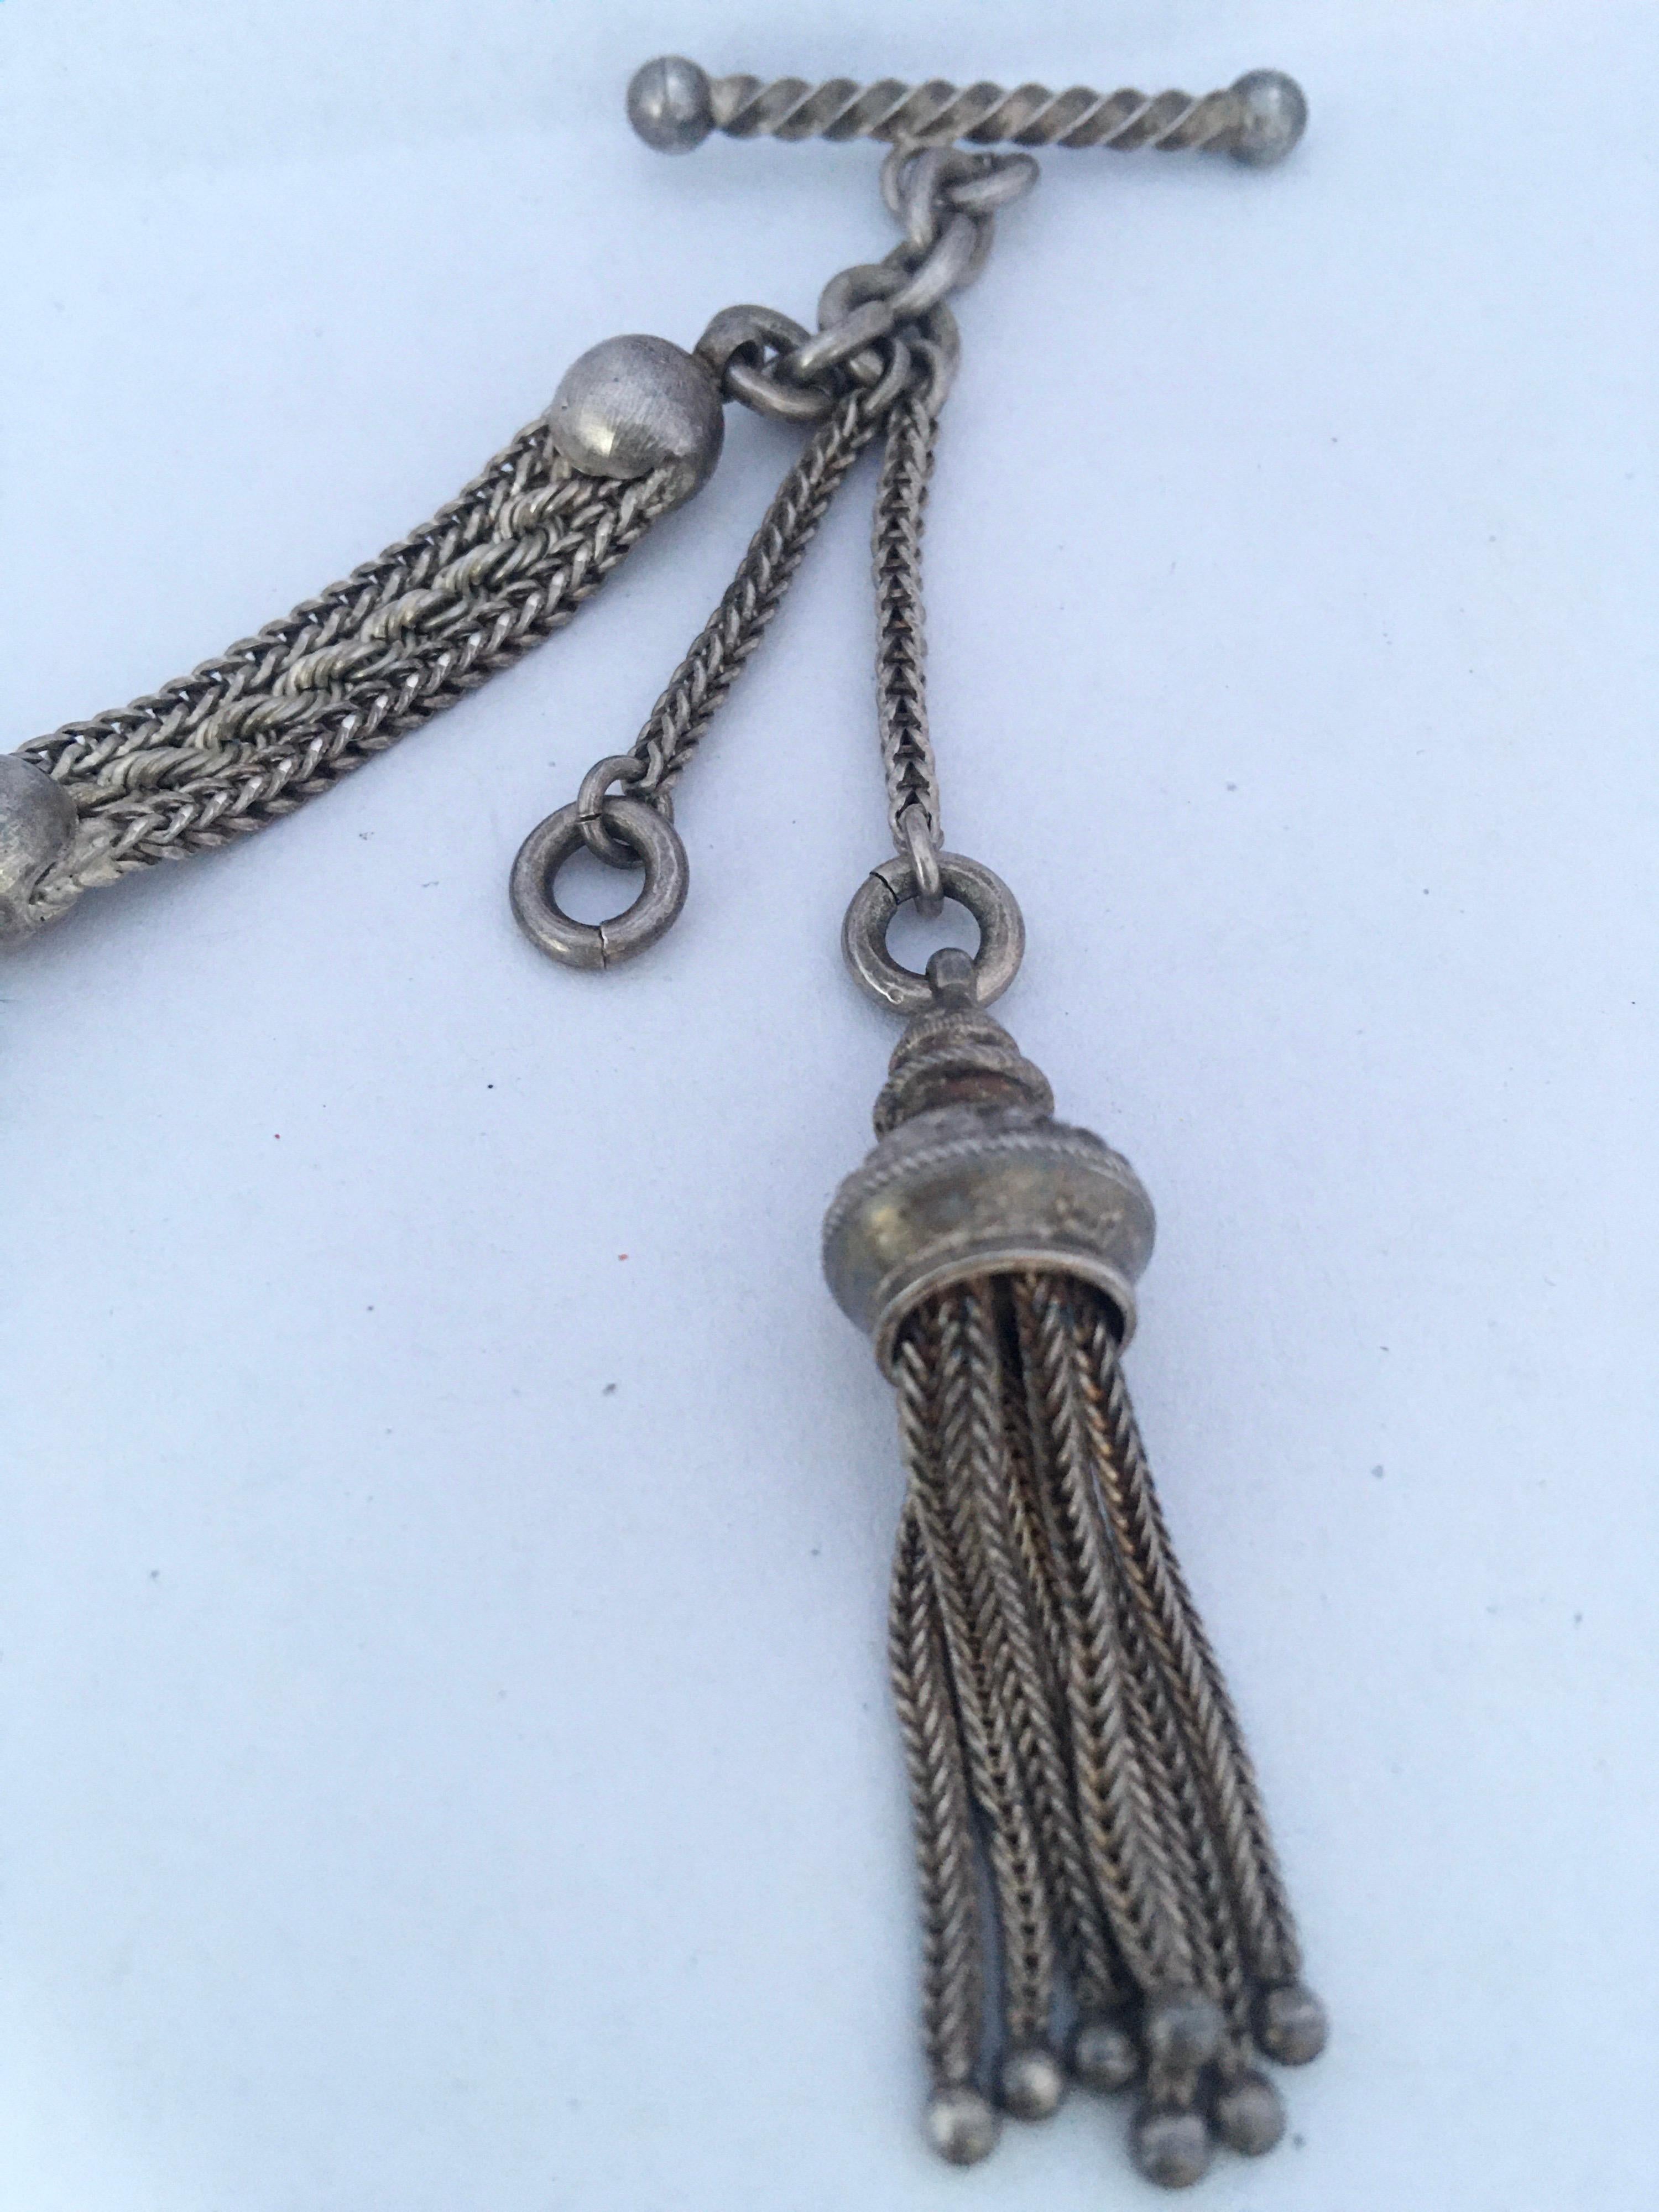 Antique Silver Ornate Pocket Watch Chain 6